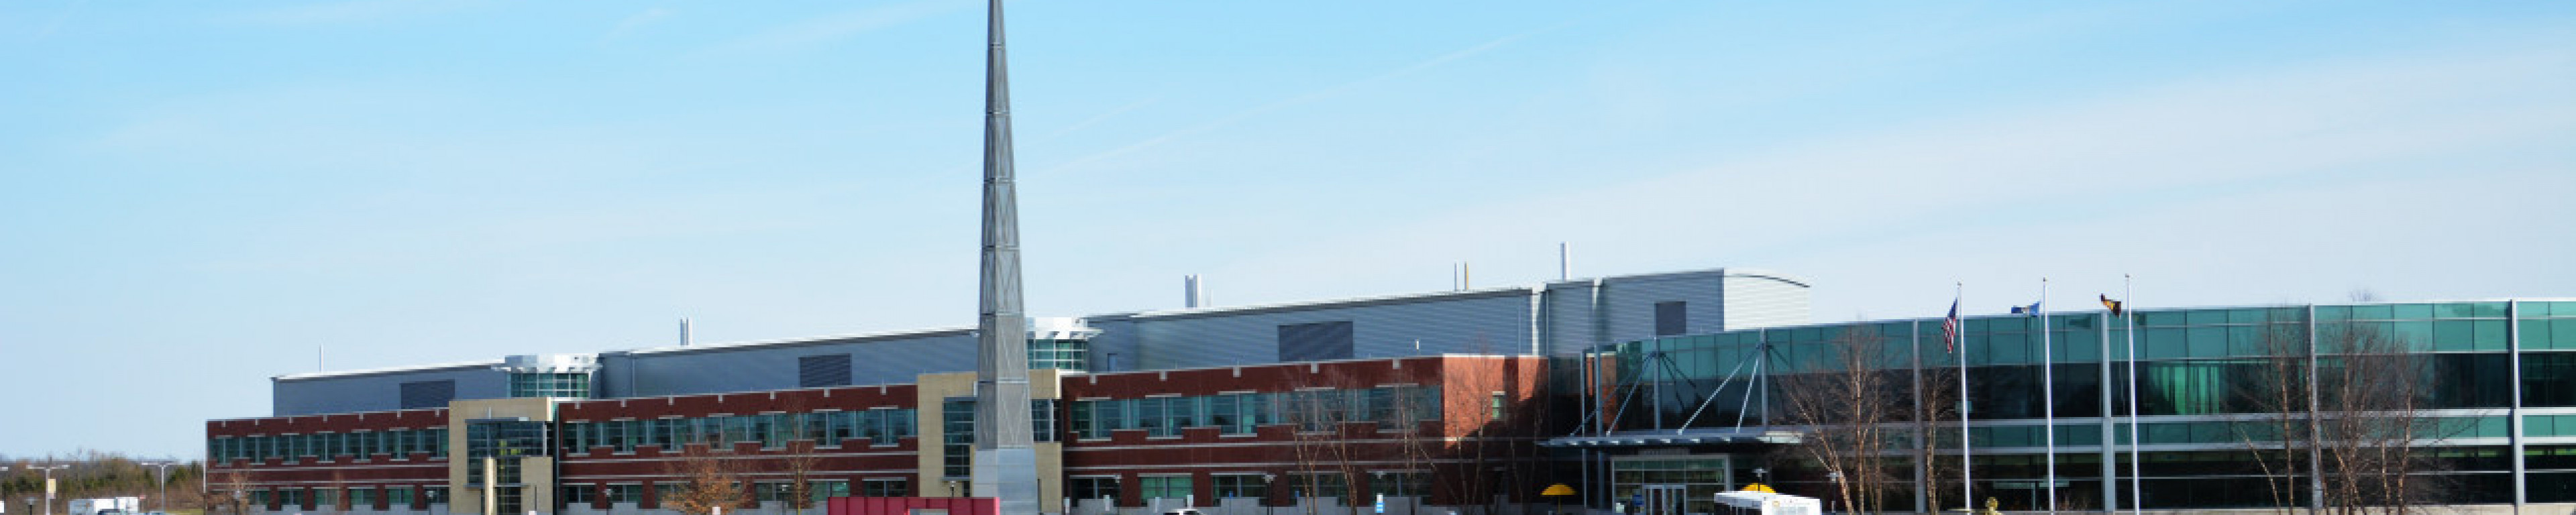 WMU's College of Engineering and Applied Sciences